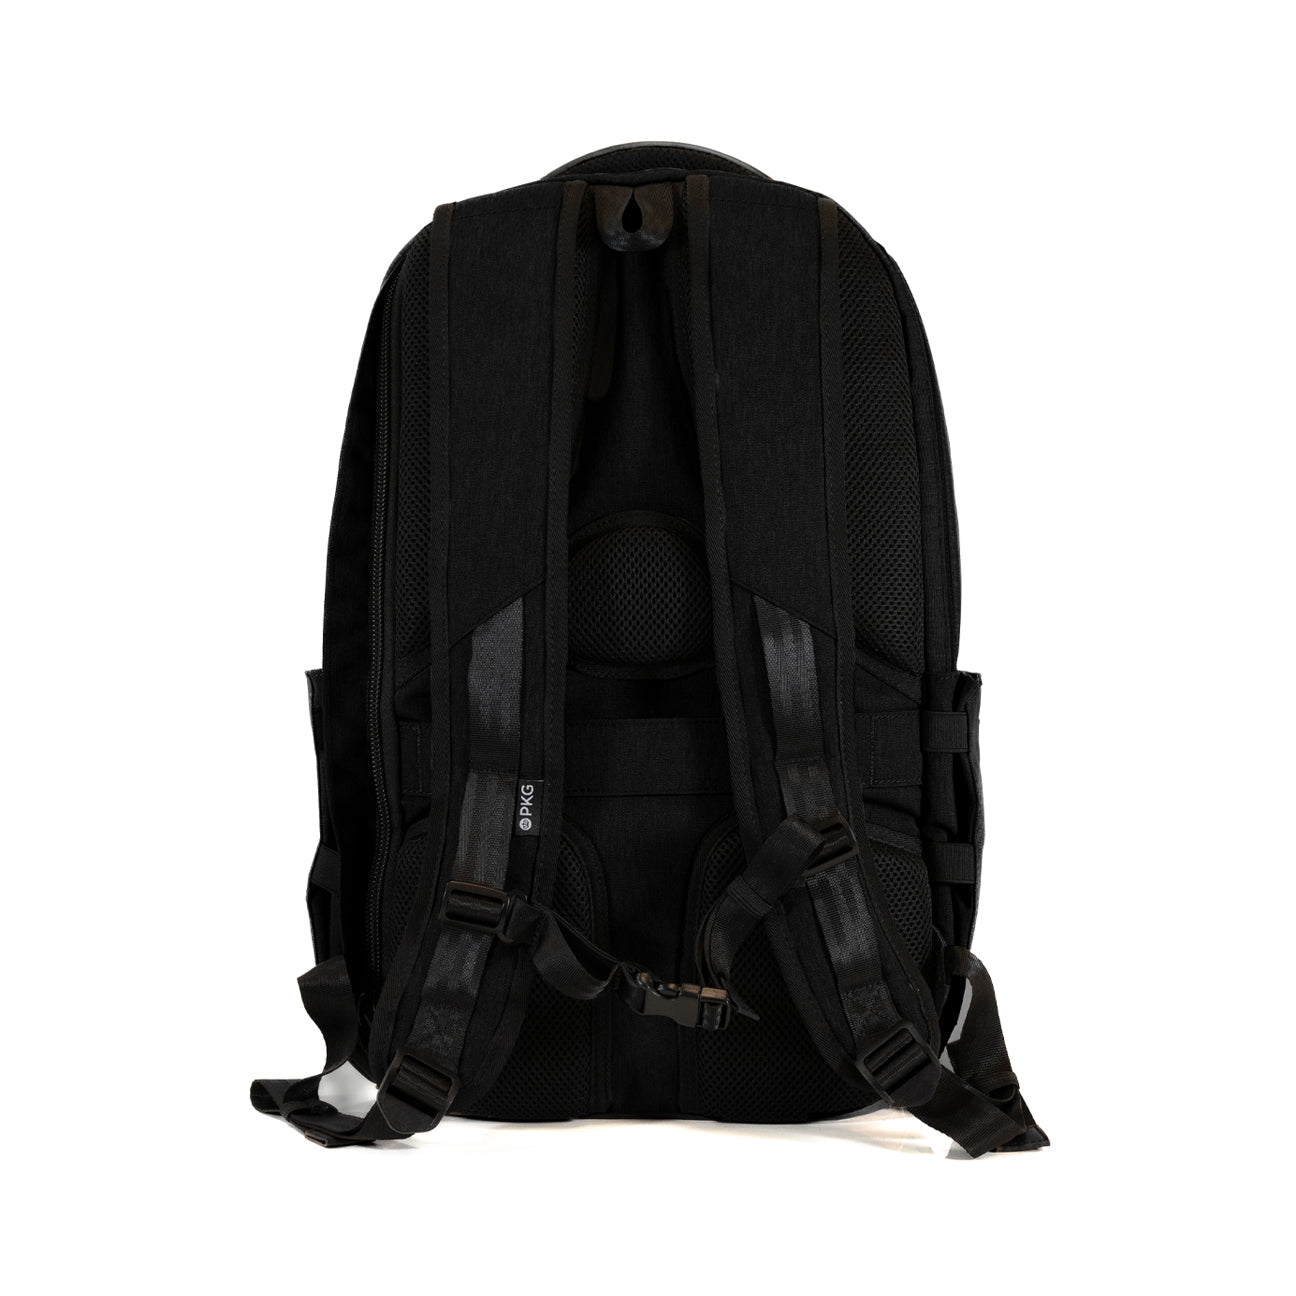 PKG Aurora 36L Recycled Backpack by PKG Carry Goods